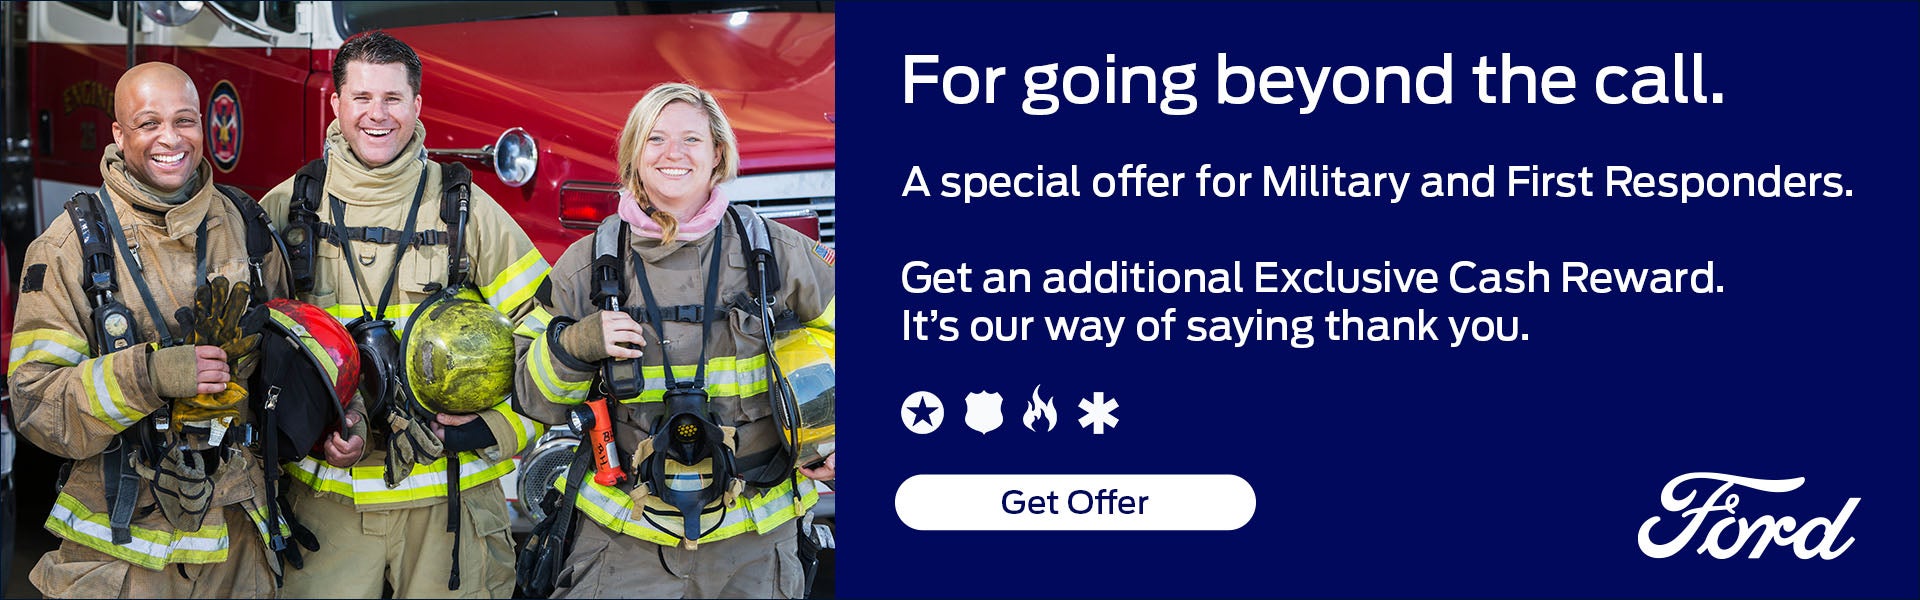 Military and First Responder Offer at Seekins Ford Lincoln